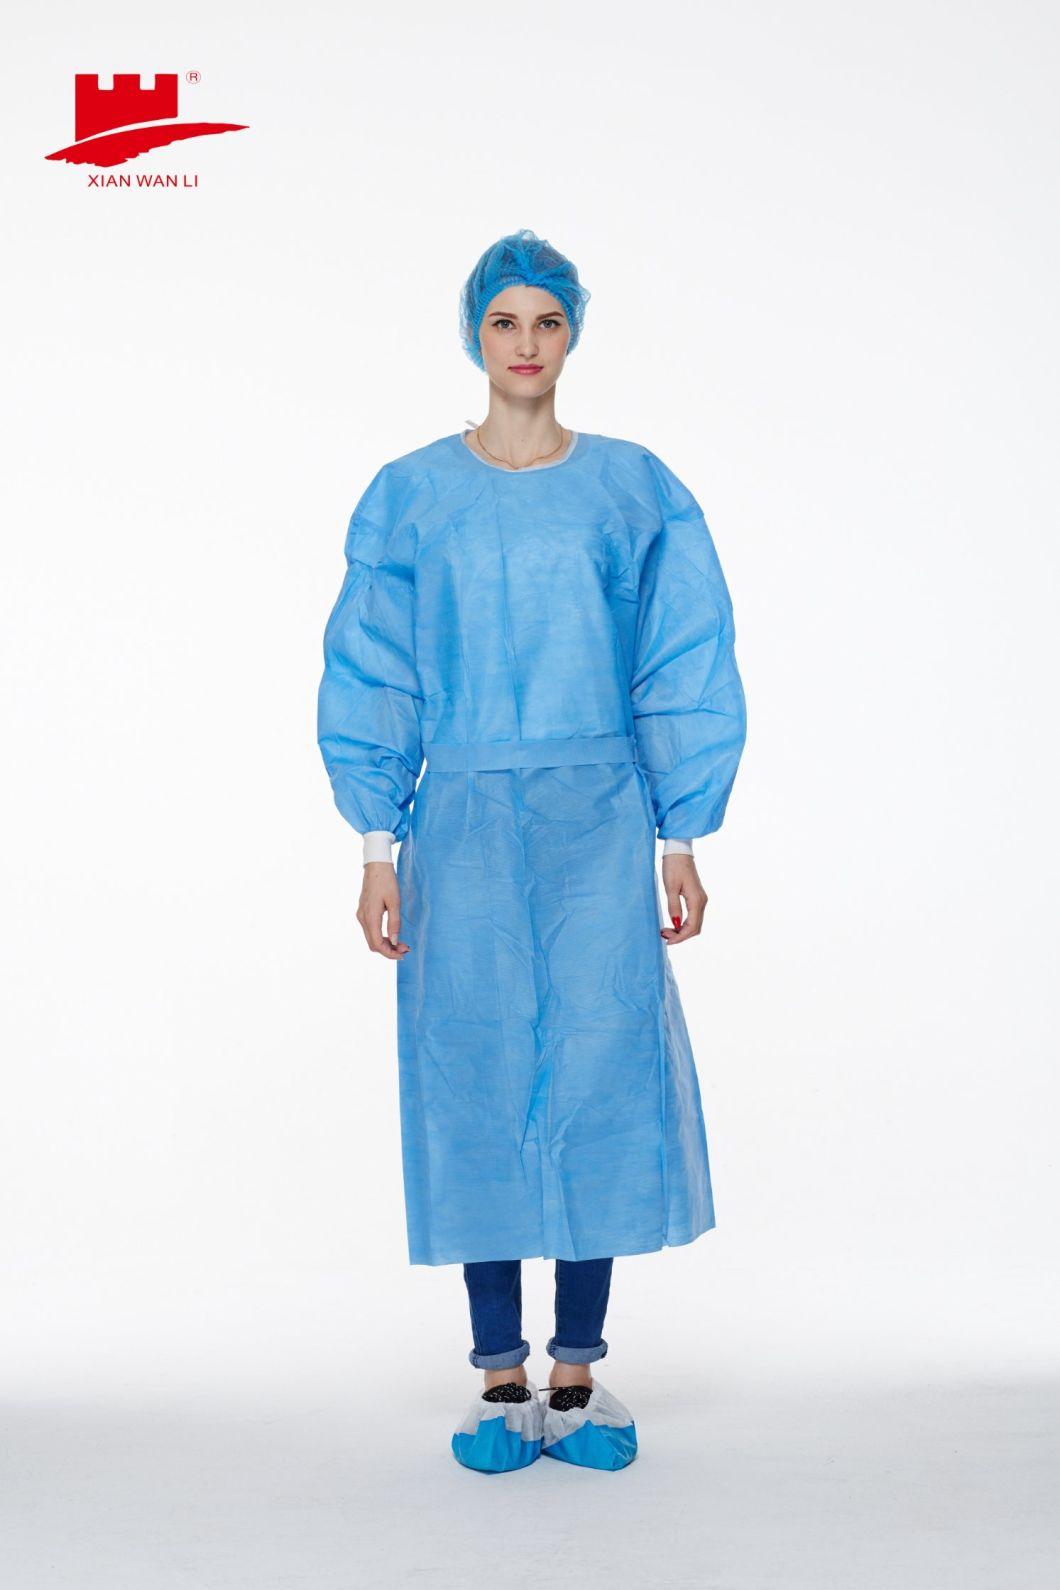 AAMI Lever 3 Breathable Sterile Disposable Surgical Gowns